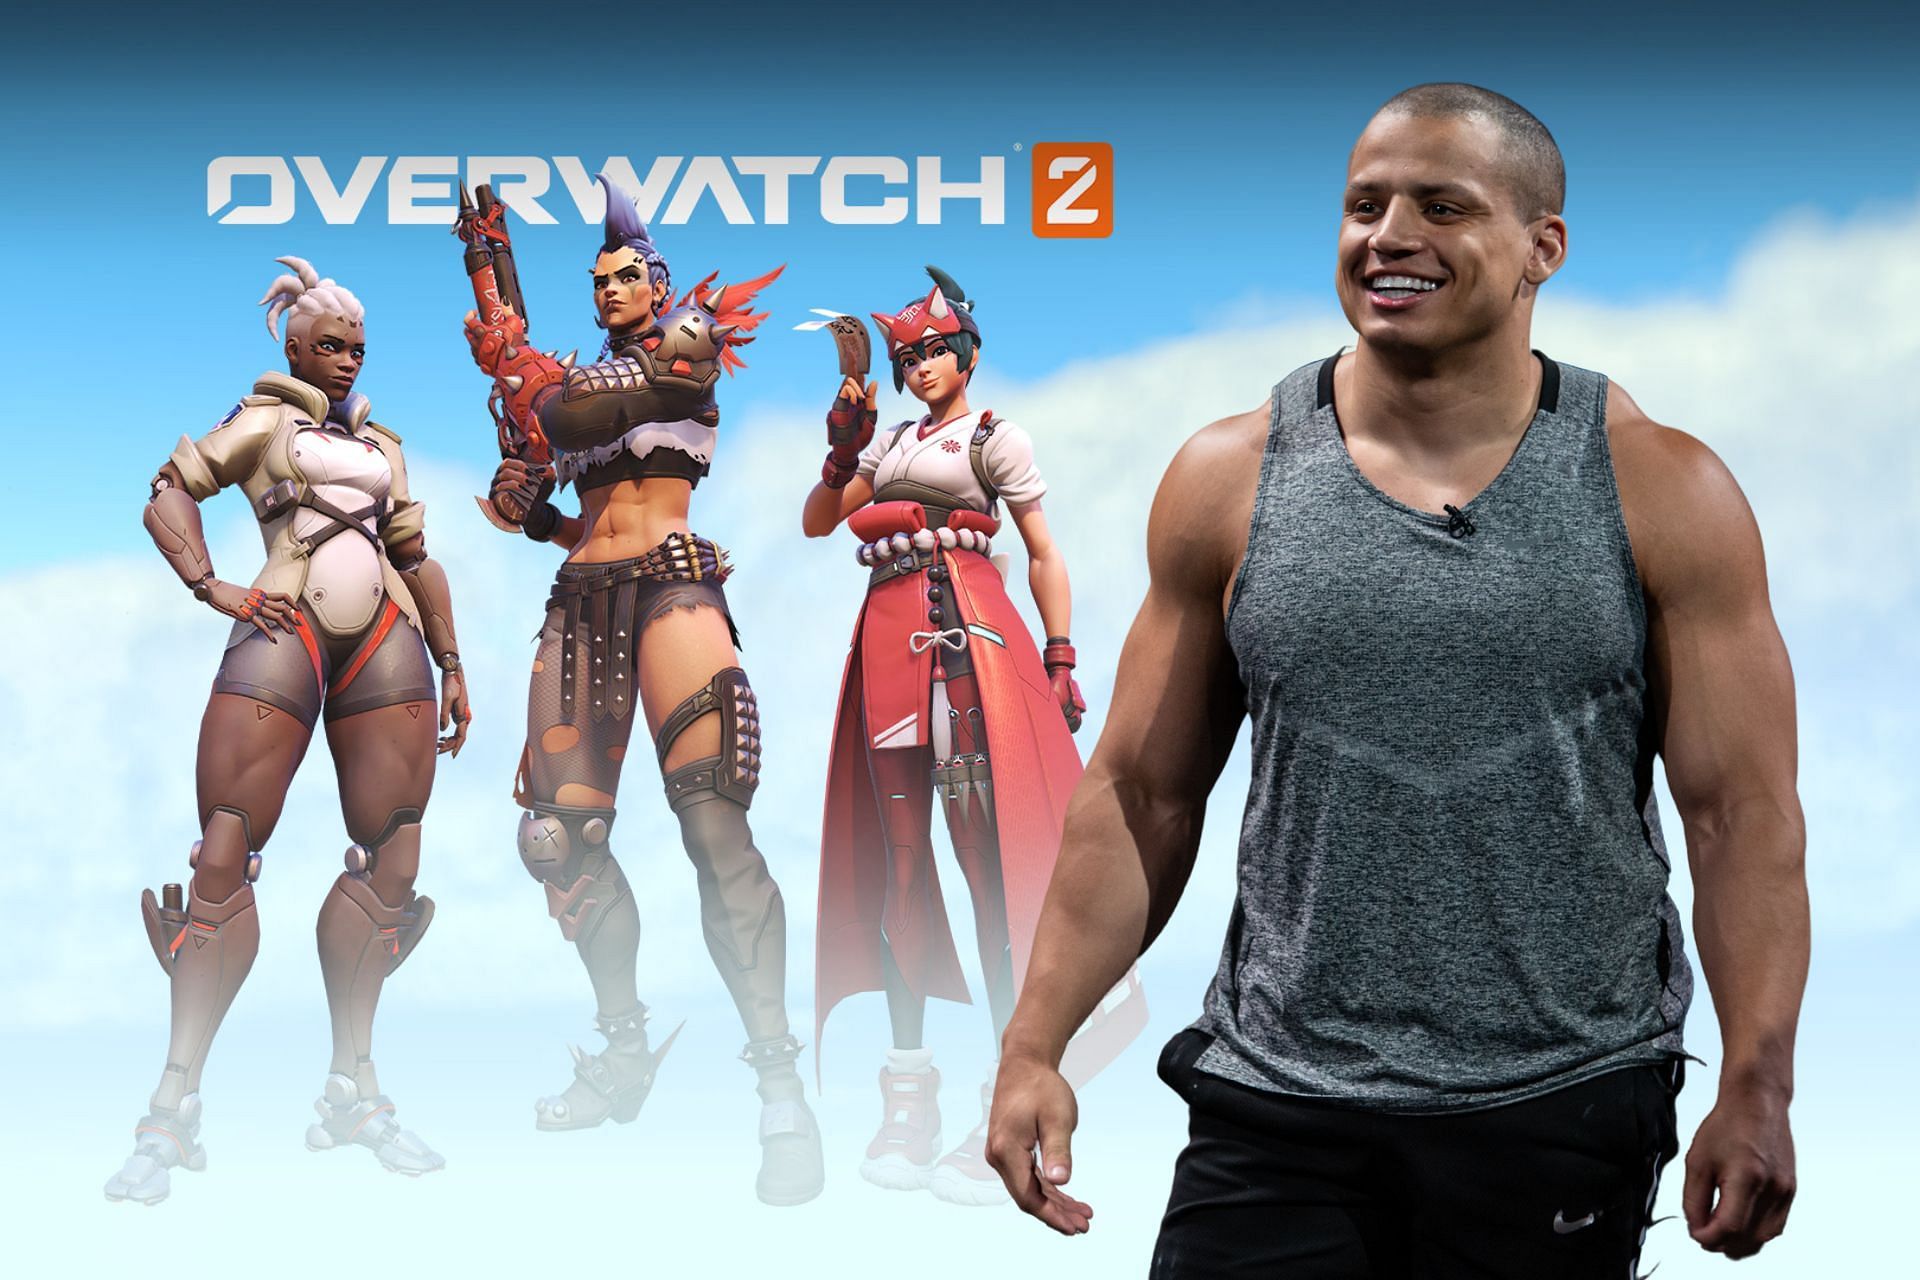 I don't care - Tyler1 rage quits Overwatch 2, says he won't play